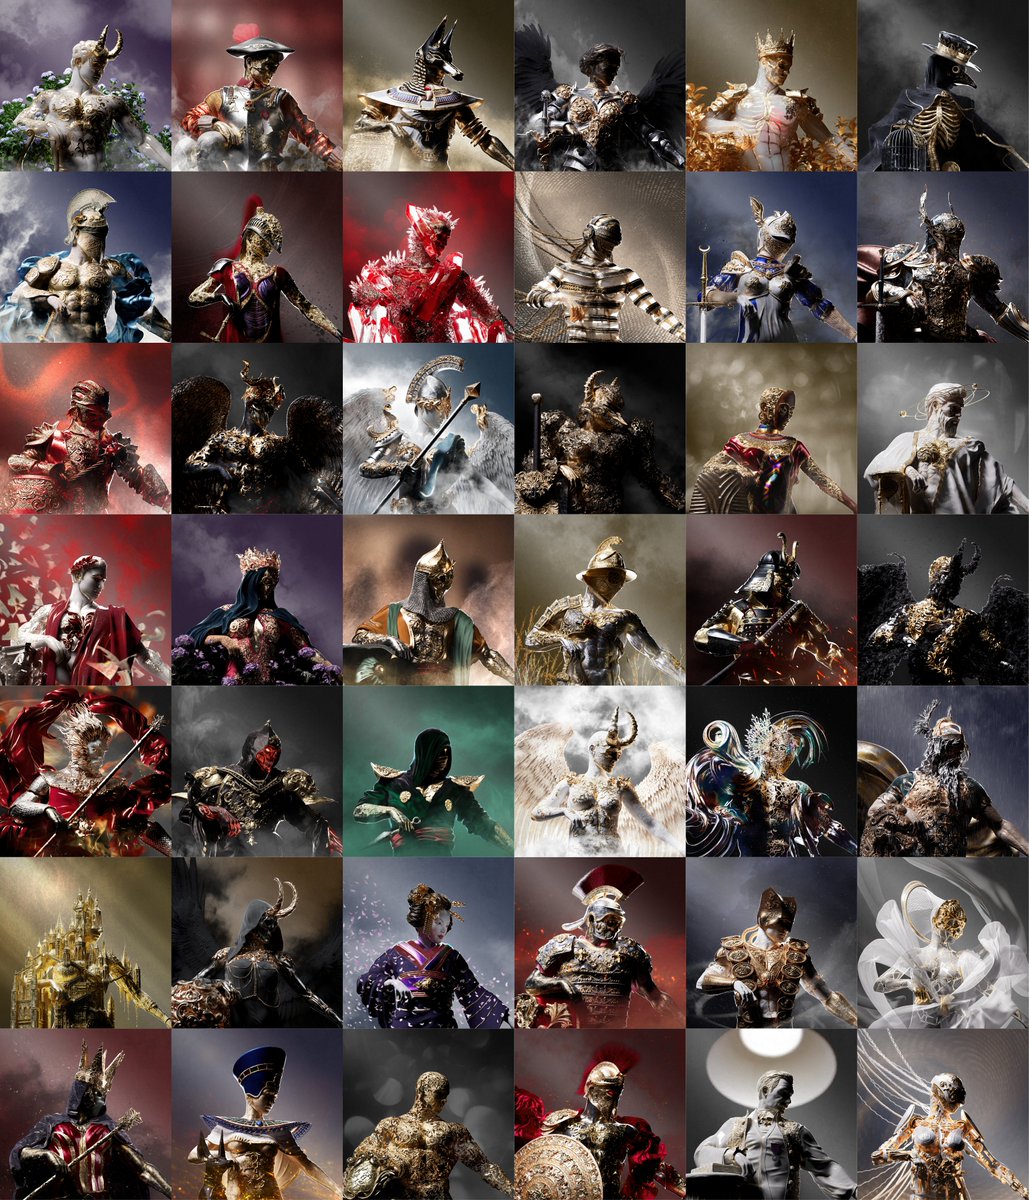 GM🤍 ⚔️𝐍𝐄𝐗𝐔𝐒 𝐀𝐍𝐈𝐌𝐀⚔️ is it just another ordinary art collection? Or is there more behind it? The collection of the 50 characters, called “Anima” is just the beginning of a long-term artistic endeavor. The 1/1/50 portraits are the just the start. The art collection…